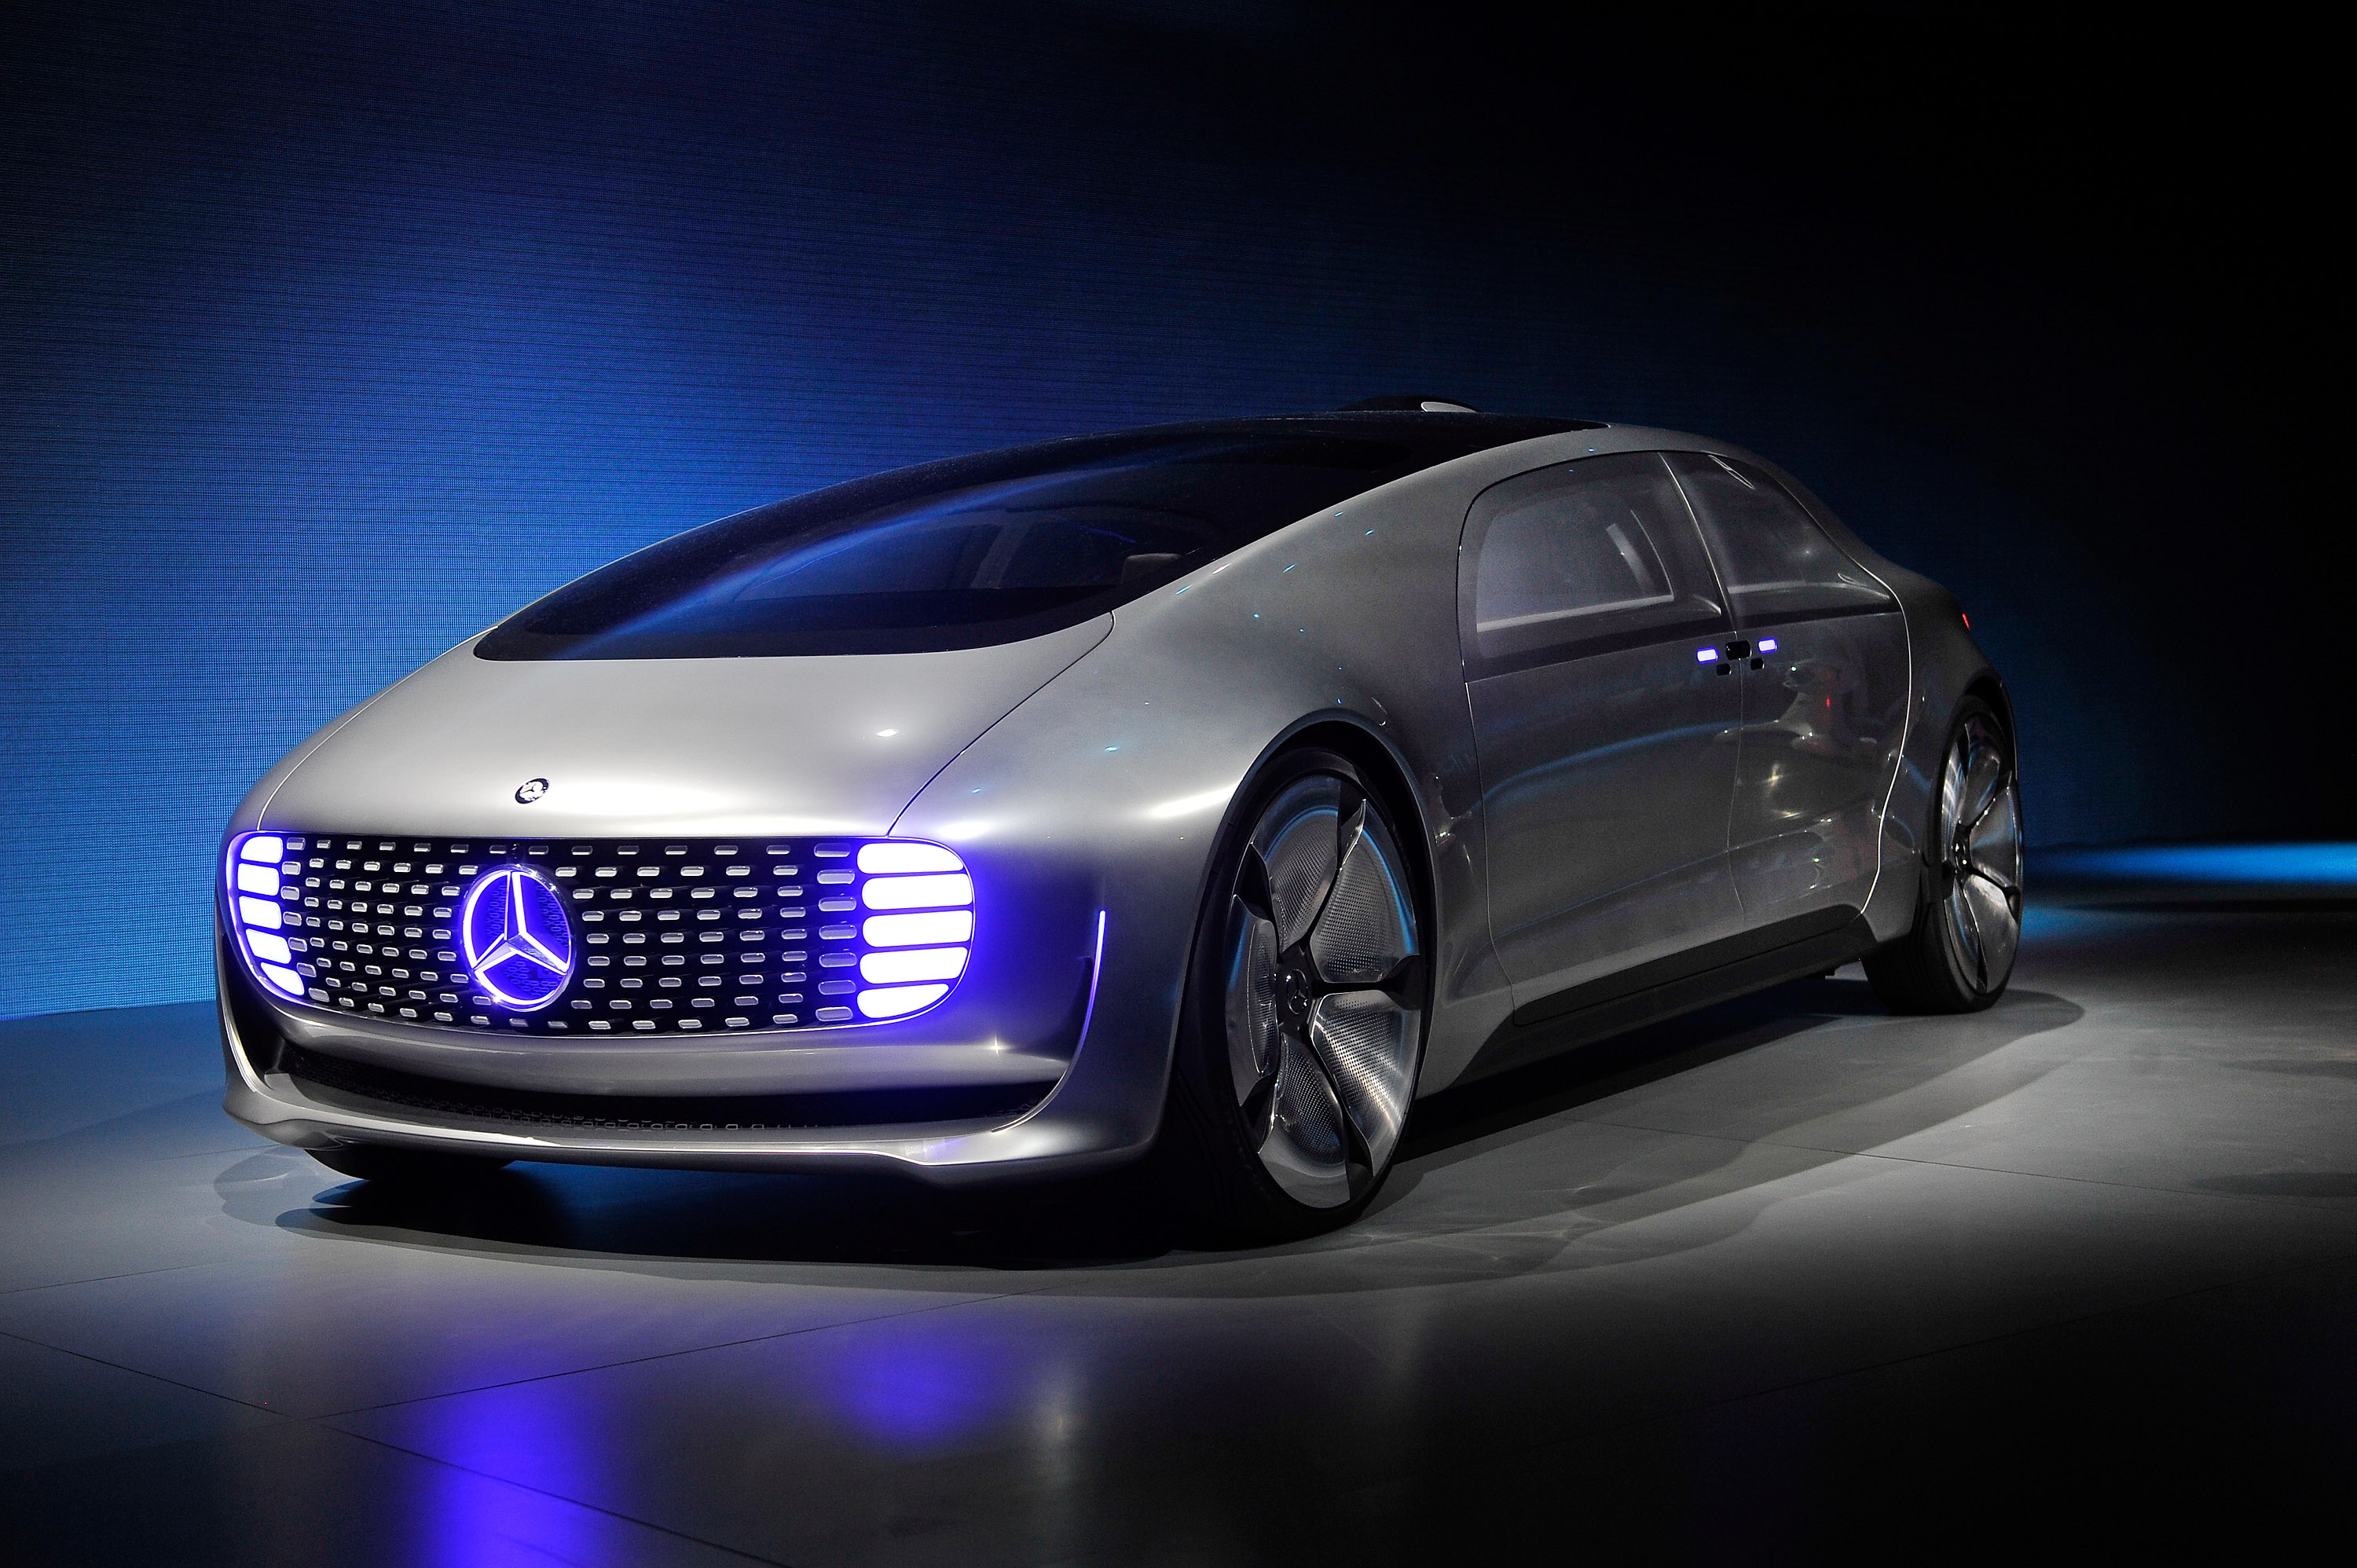 A Mercedes-Benz F 015 autonomous driving automobile is displayed at the Mercedes-Benz press event at the 2015 International CES on Jan. 5, 2015 in Las Vegas. (David Becker—Getty Images)